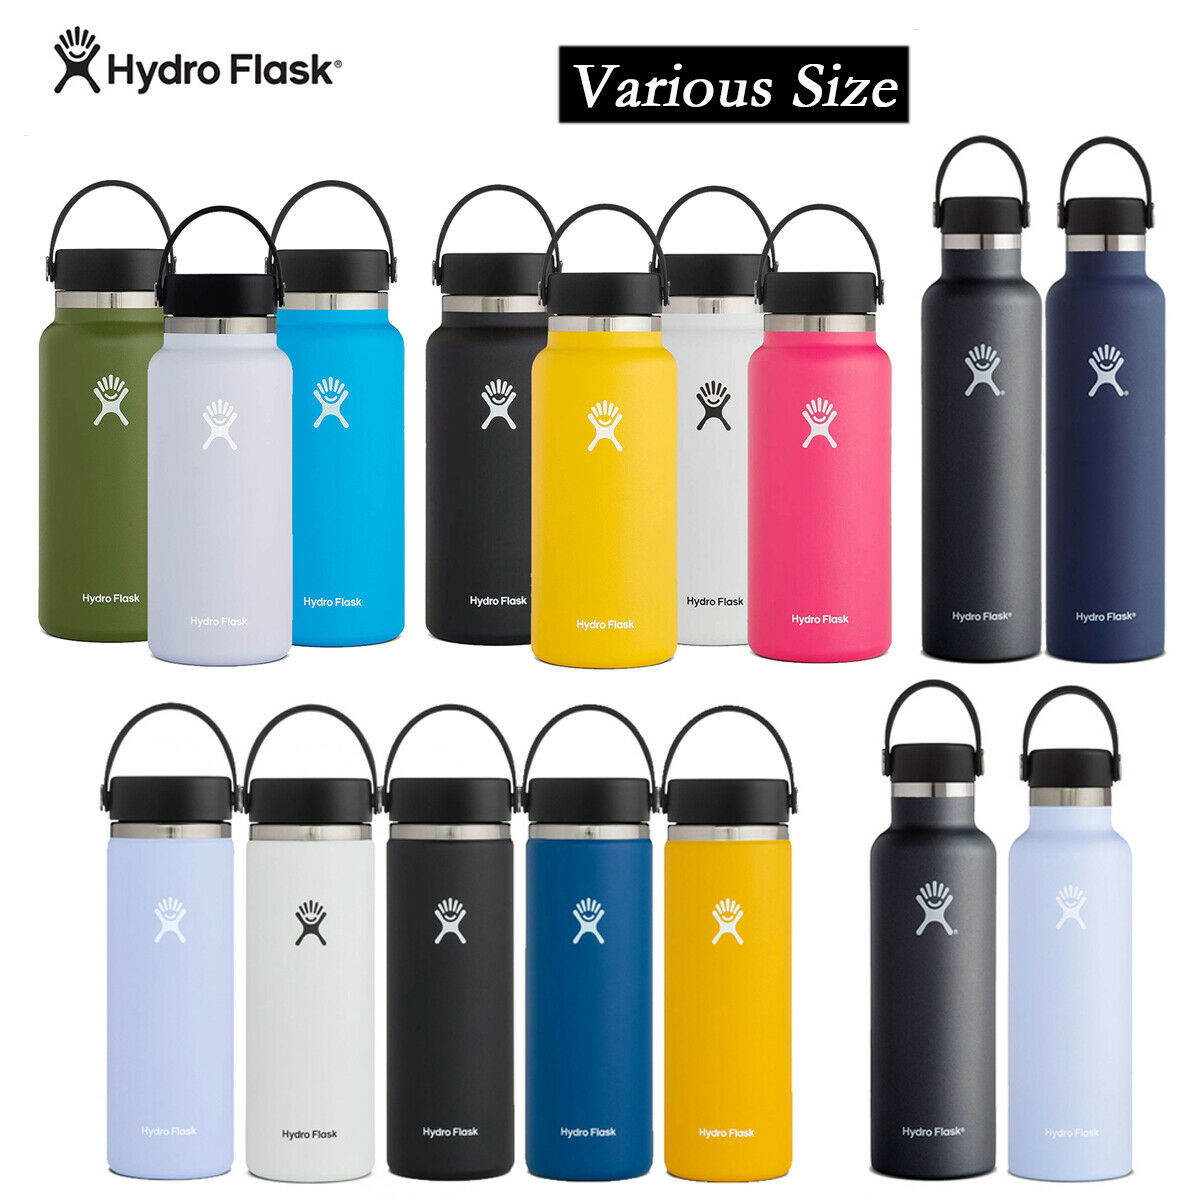 New Hydro Flask Water Bottle Wide/Standard Mouth - with Flex Cap , Various Size